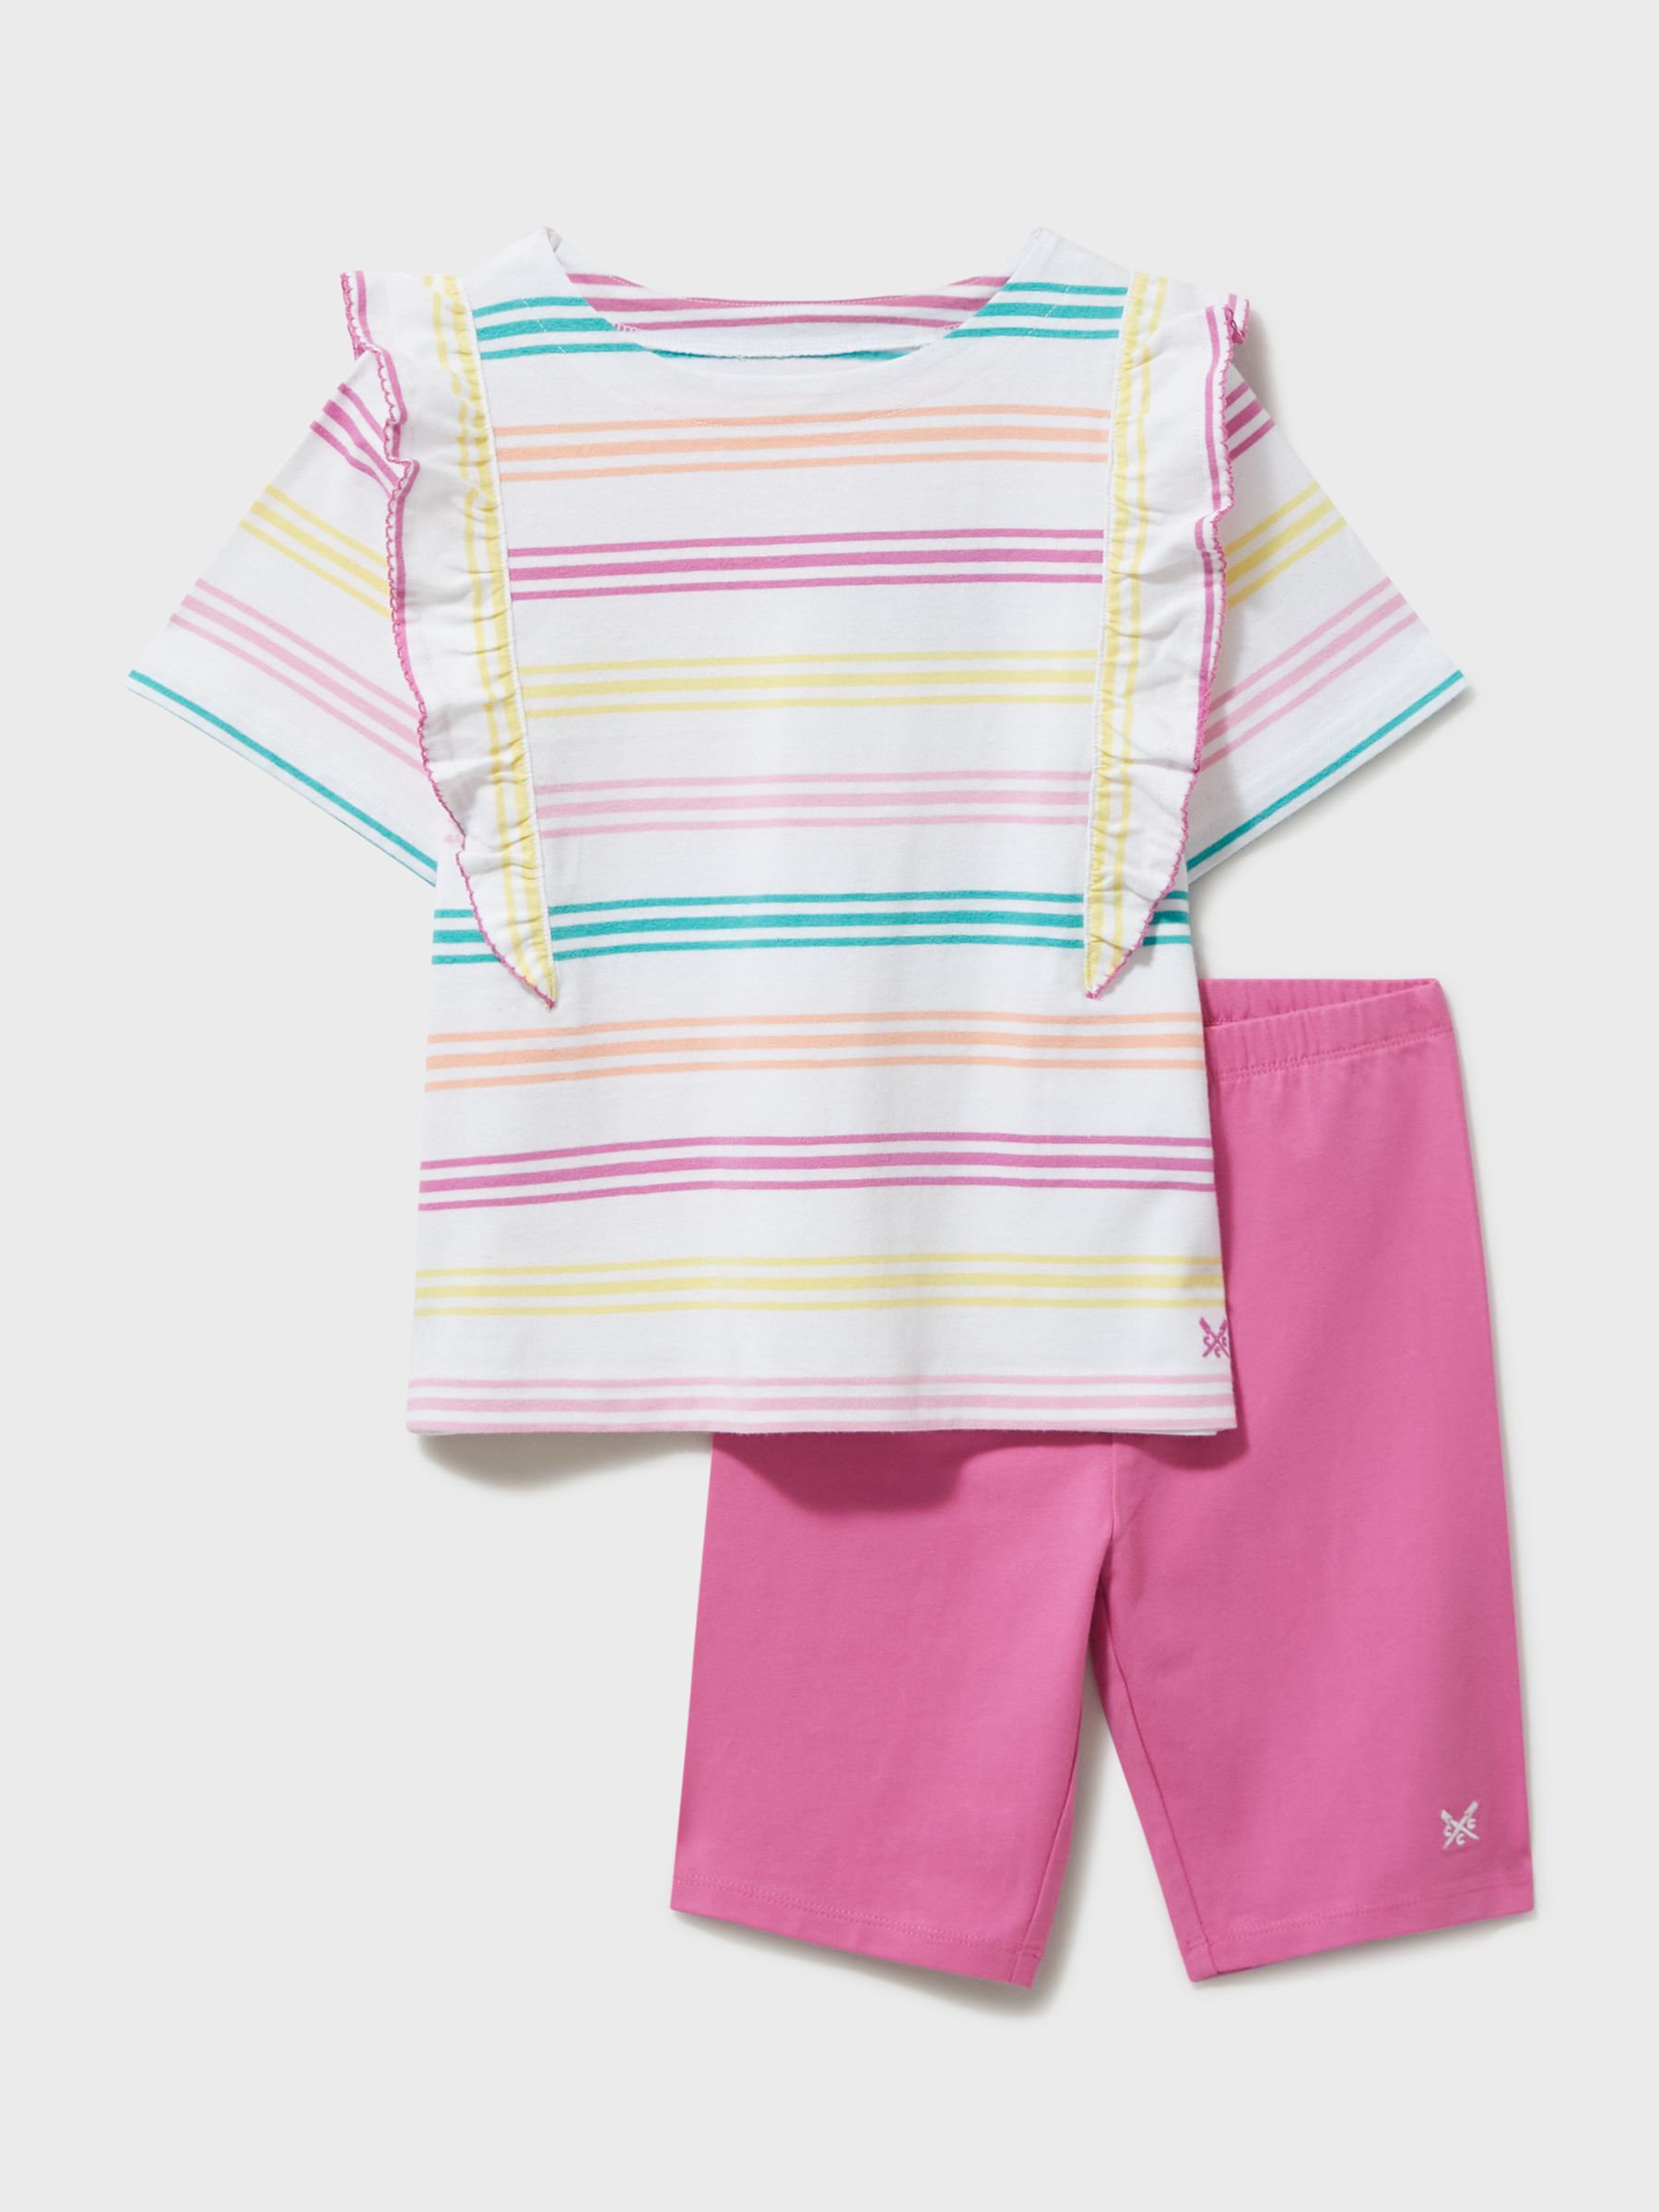 Crew Clothing Kids' Striped Longline Top and Cropped Leggings Set, Multi, 8-9 years